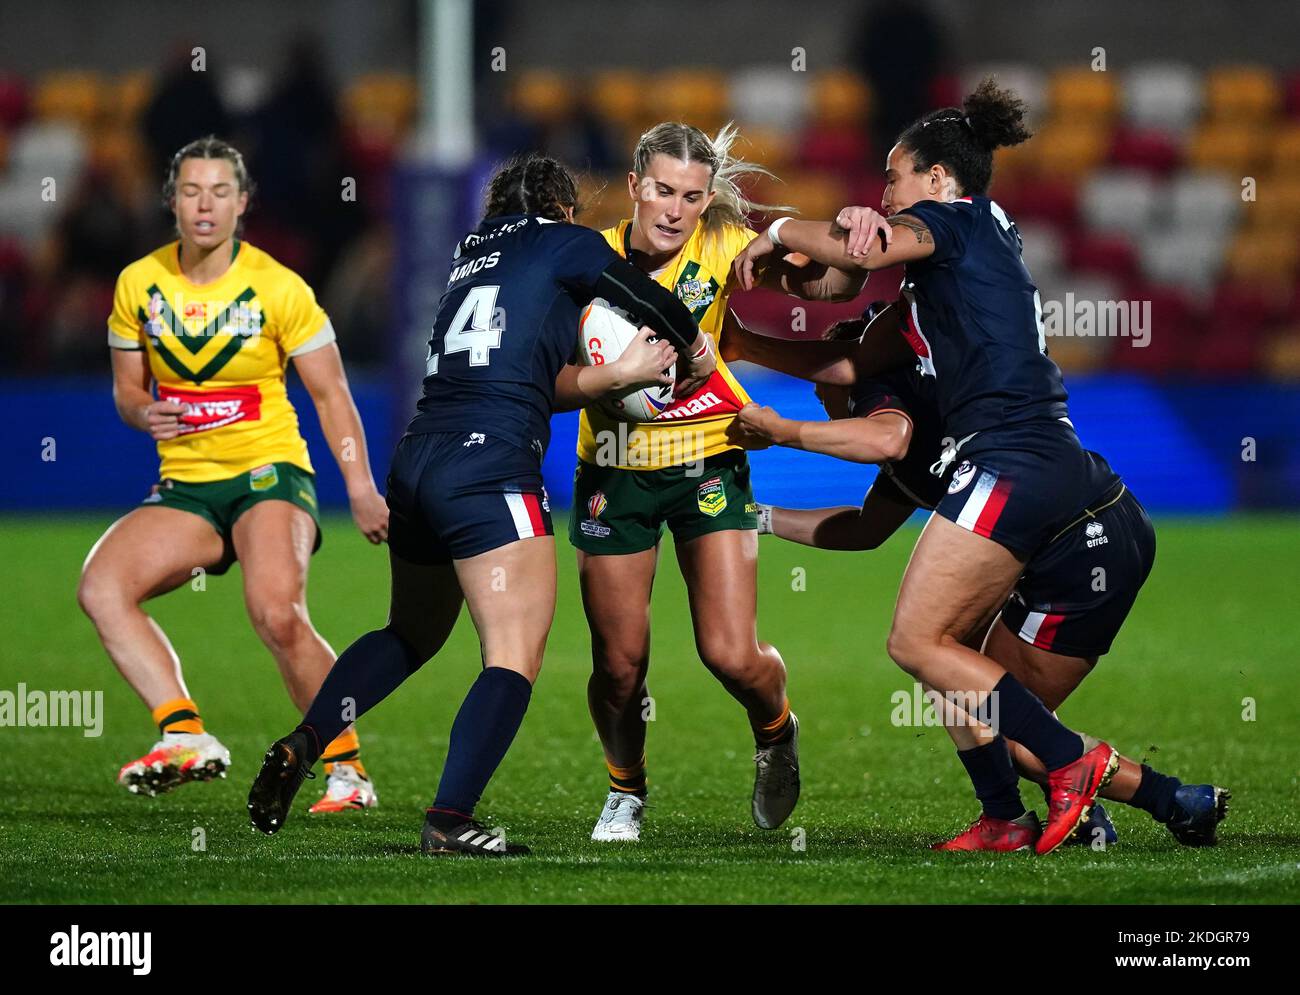 Australia's Shenae Ciesiolka tackled by France's Fanny Ramos (left) and France's Elisa Ciria during the Women's Rugby League World Cup Group B match at the LNER Community Stadium, York. Picture date: Sunday November 6, 2022. Stock Photo